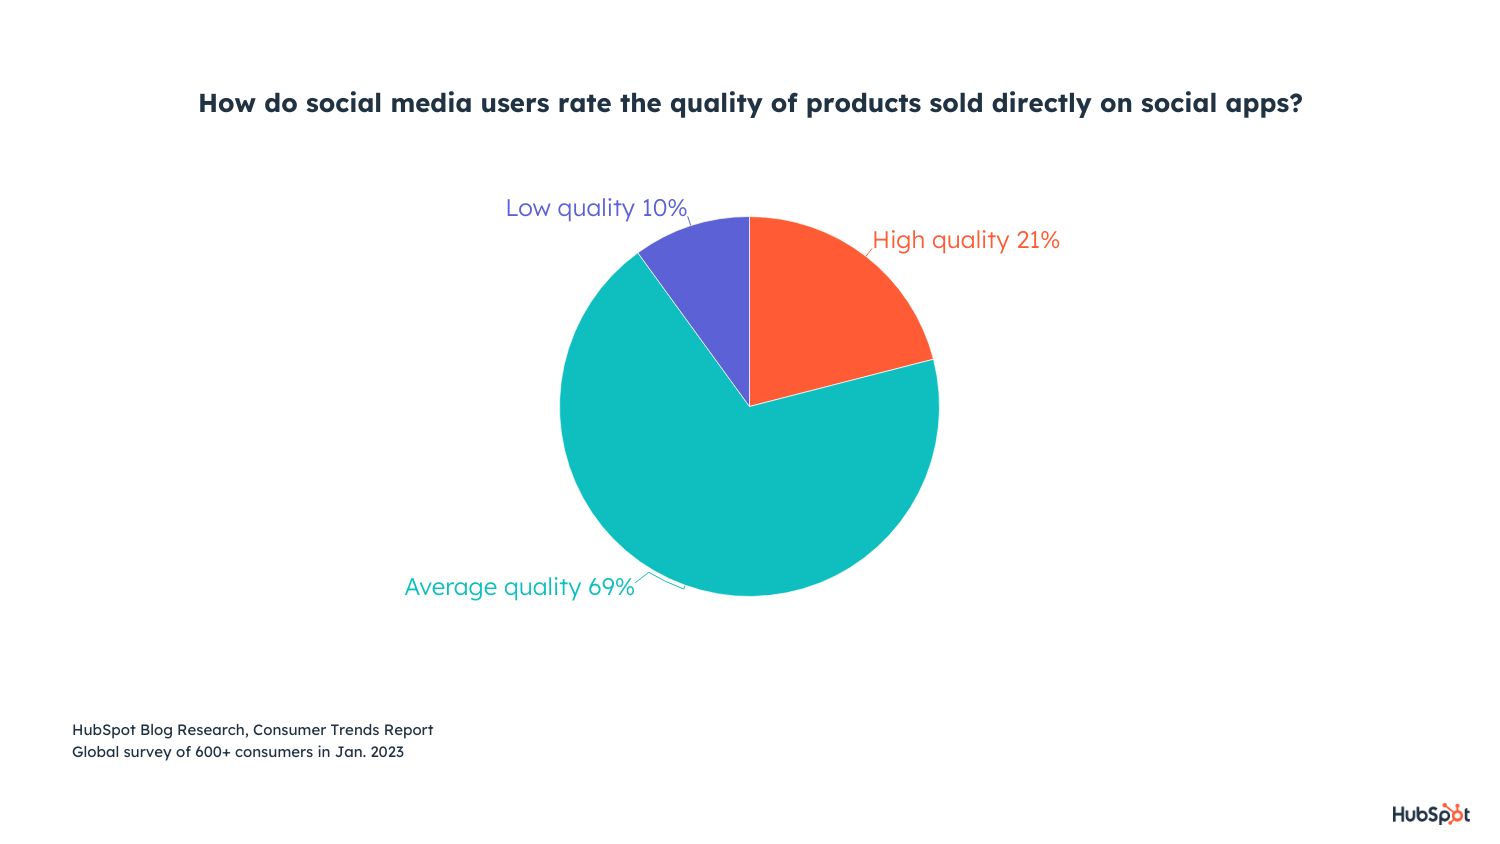 People don't rate products as high quality on social apps